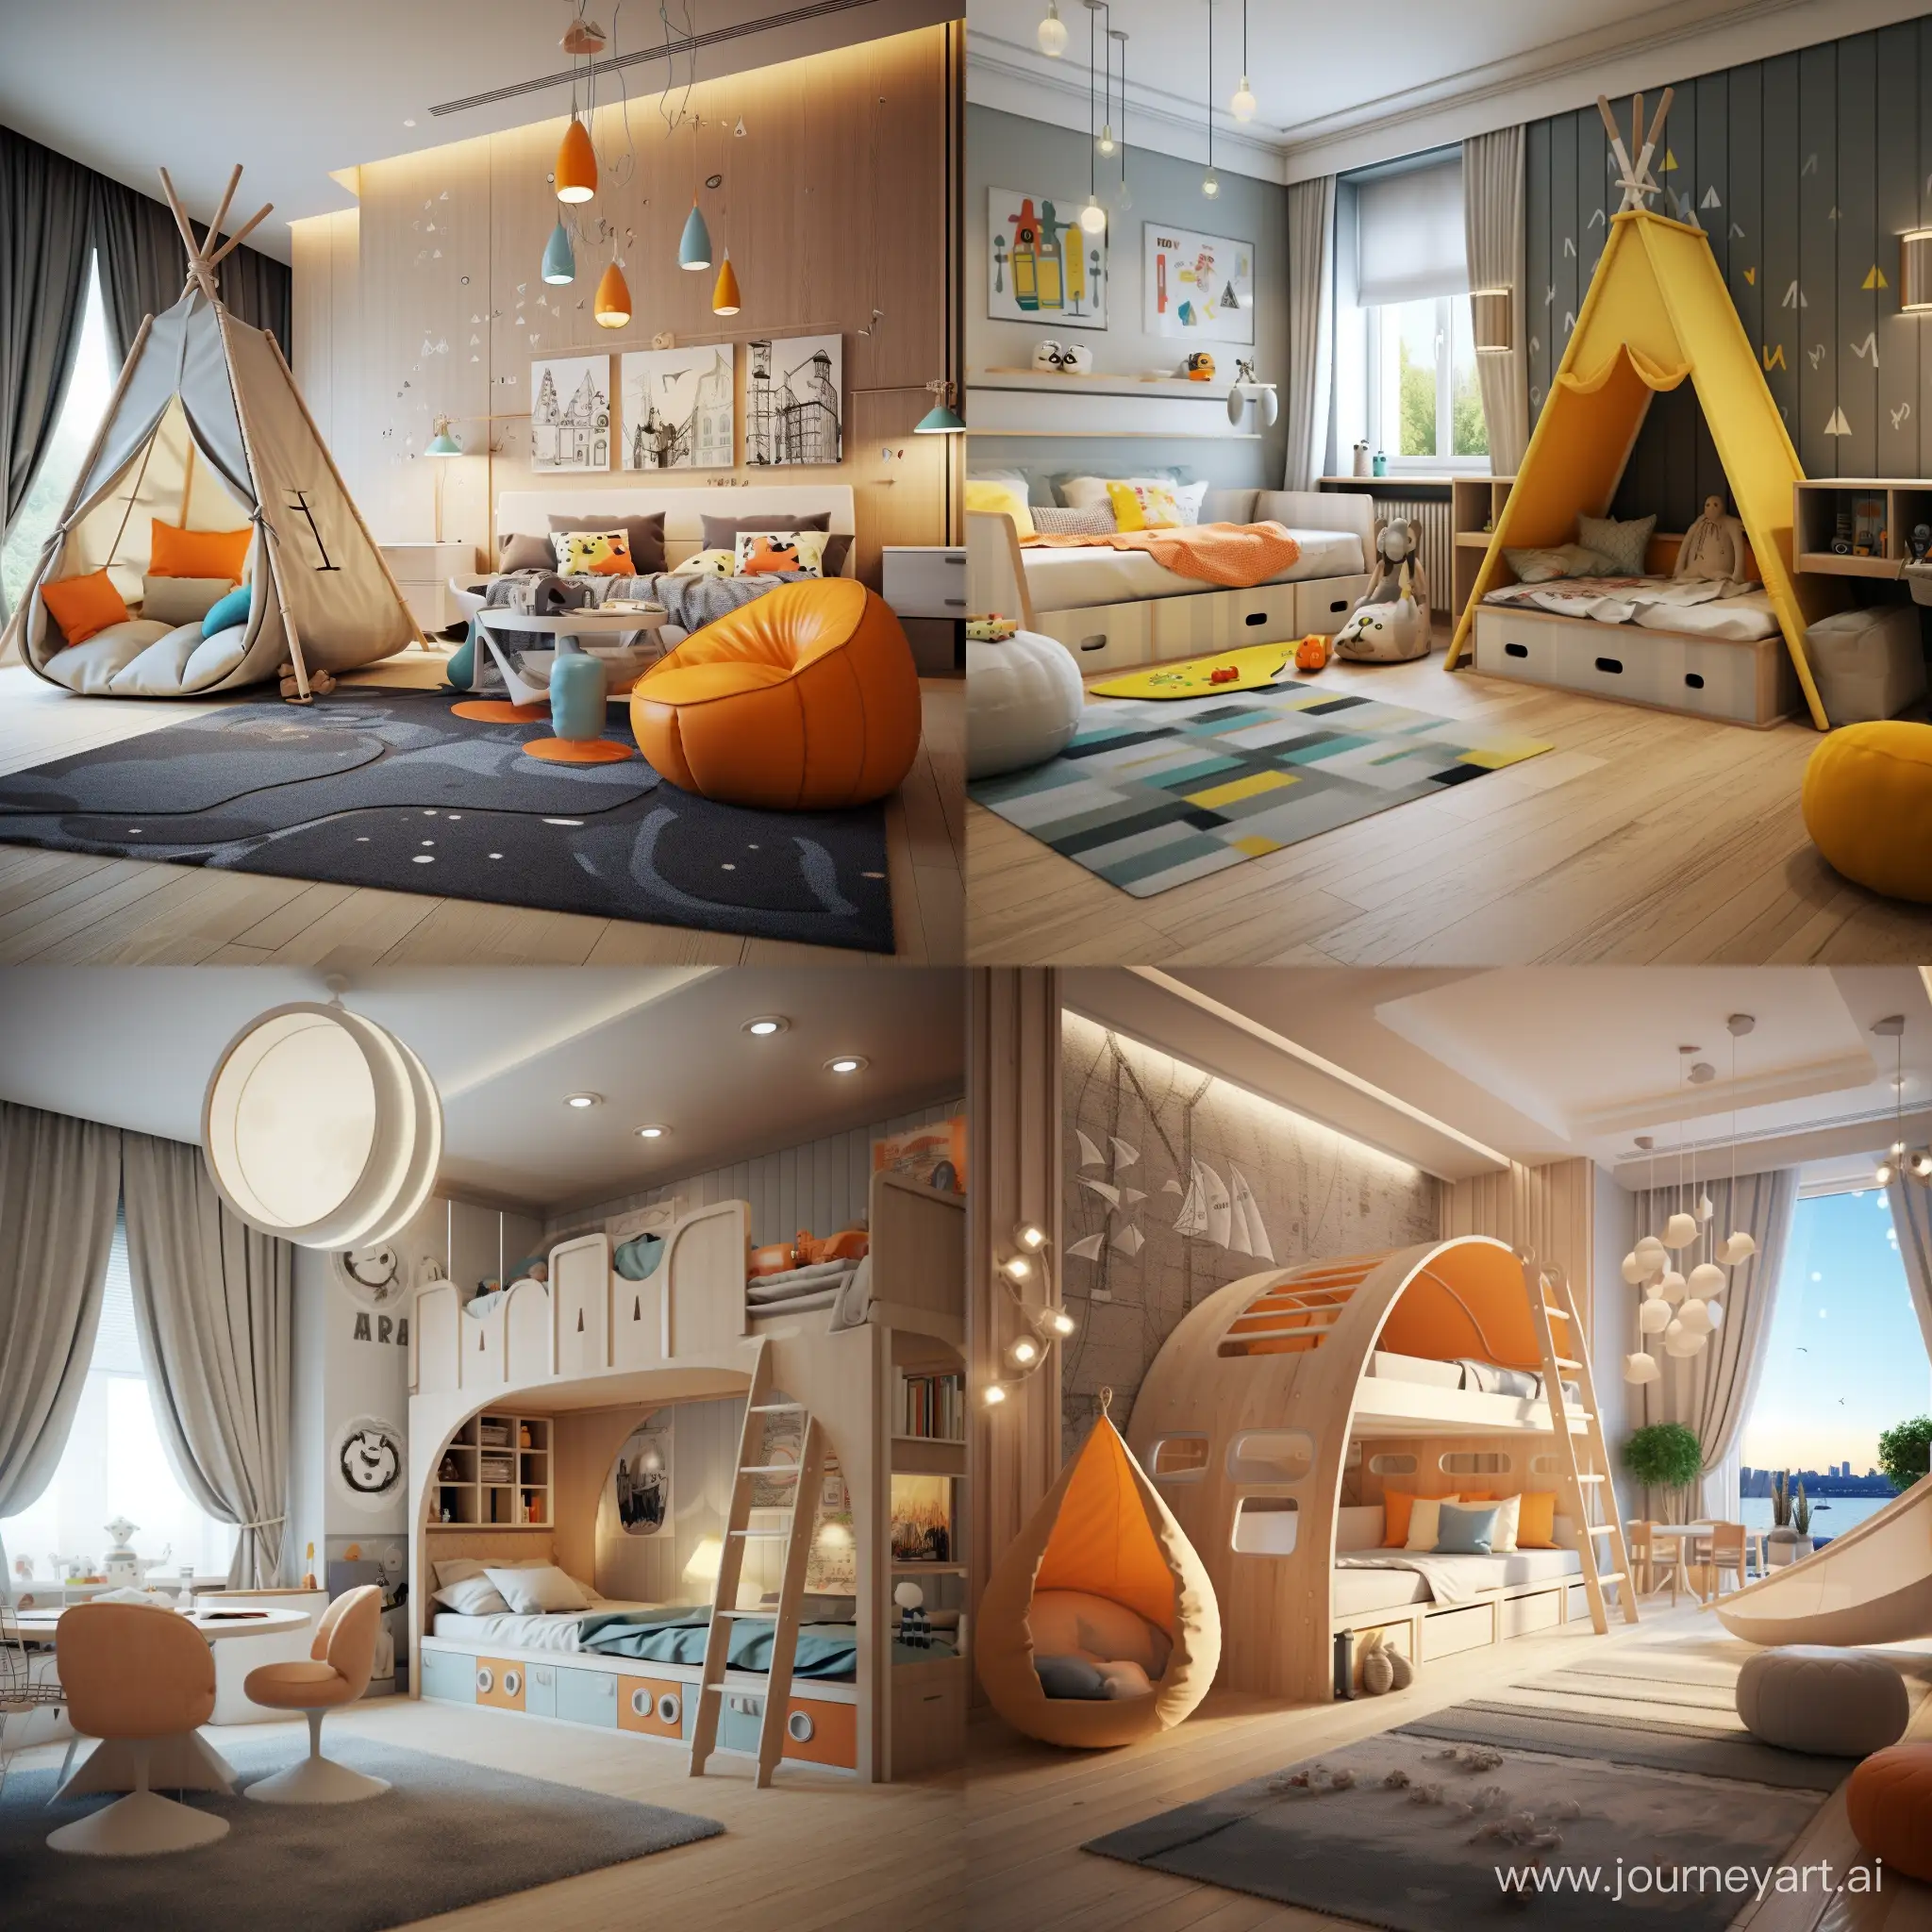 Imaginative-Childrens-Room-Design-with-AR-Experience-Room-34417